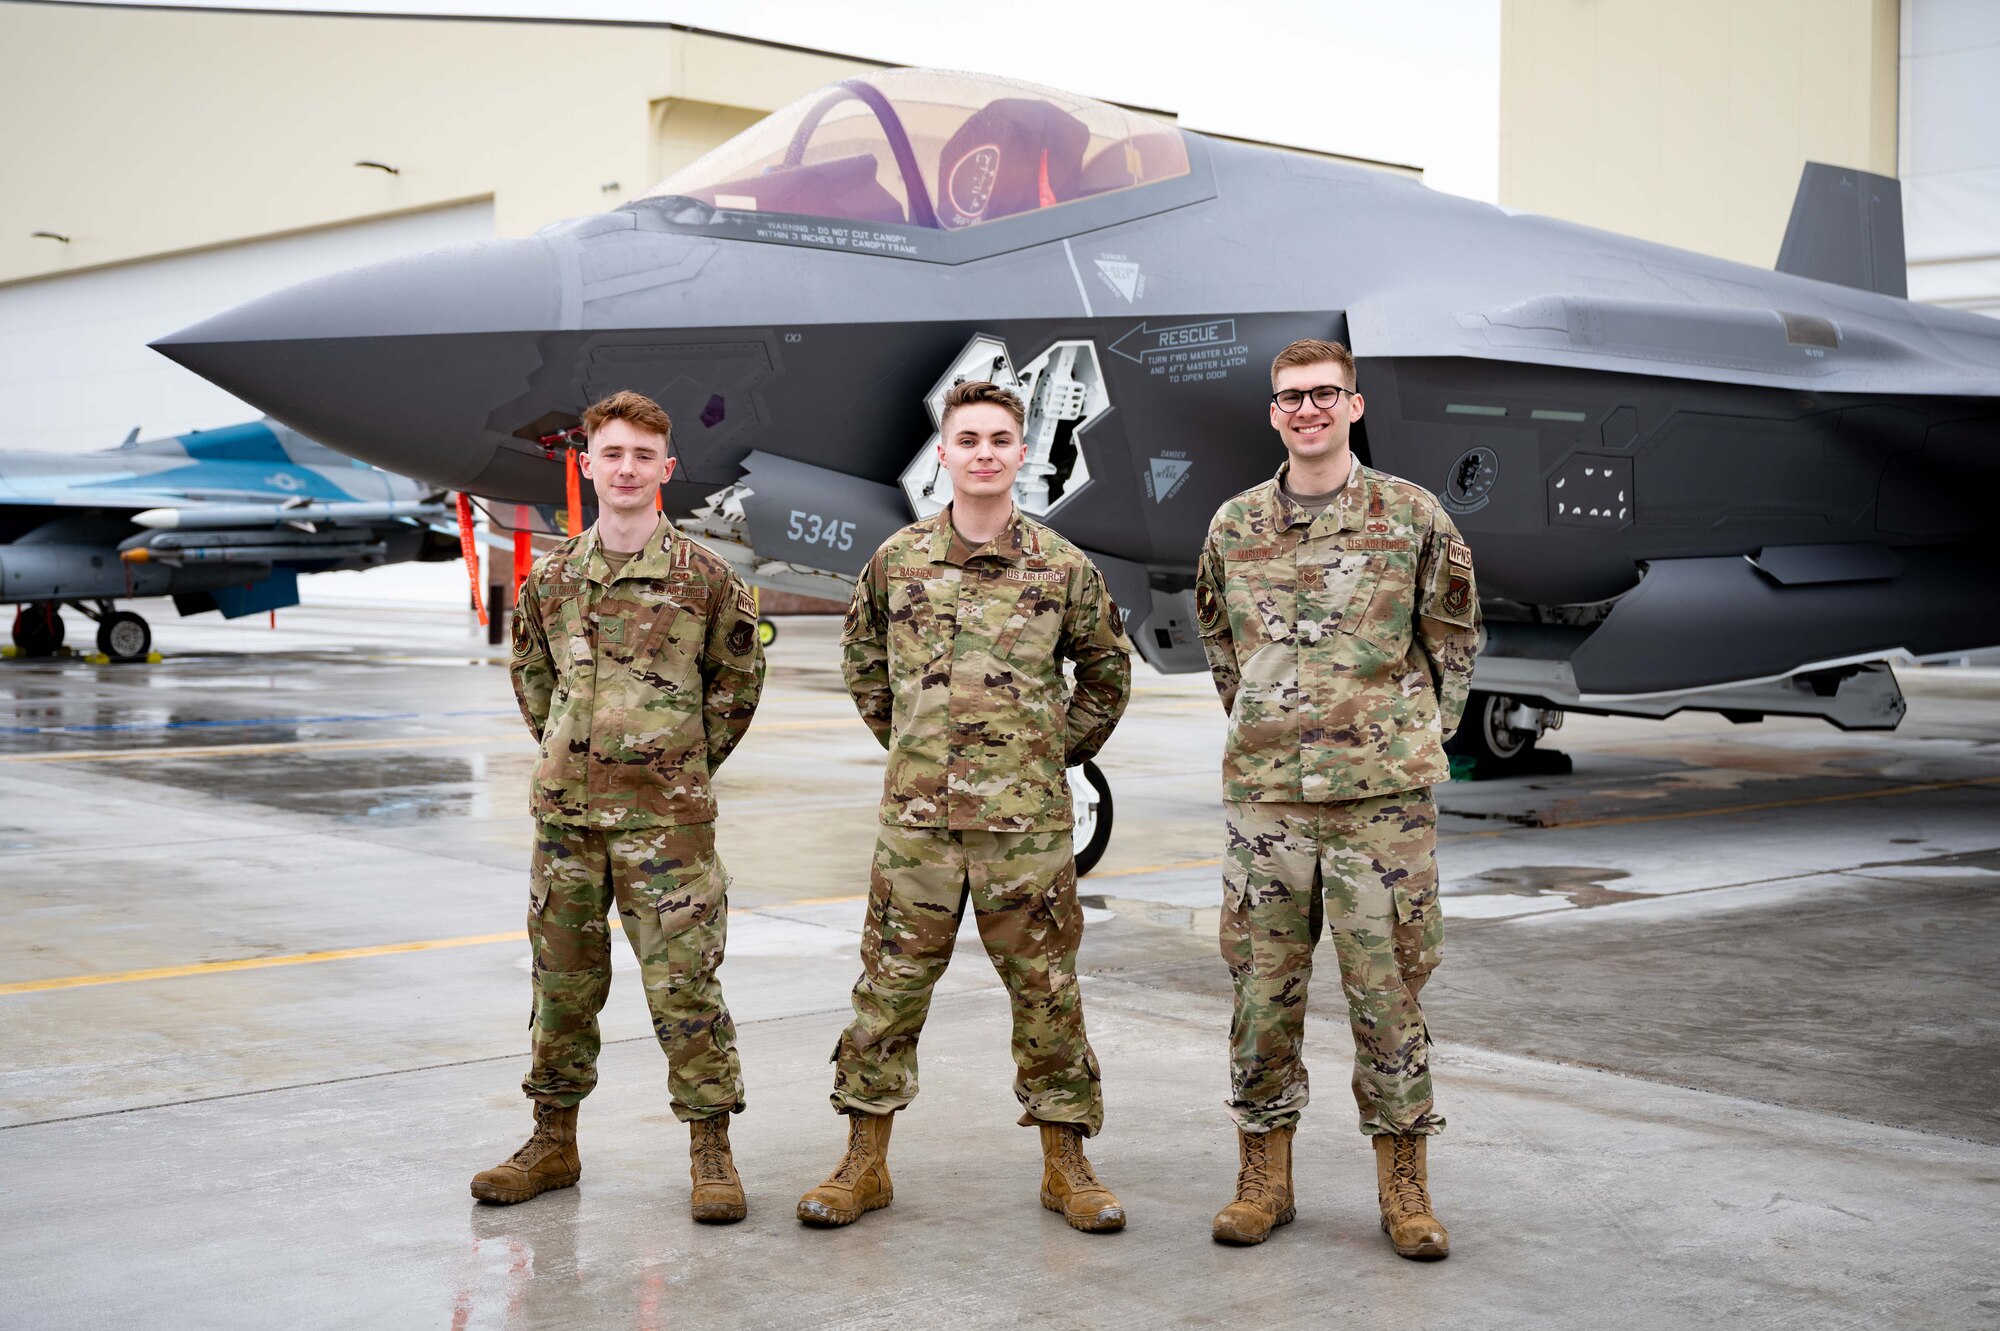 U.S. Airmen from the 356th Aircraft Maintenance Unit pose for a group photo on Eielson Air Force Base, Alaska, May 21, 2021.